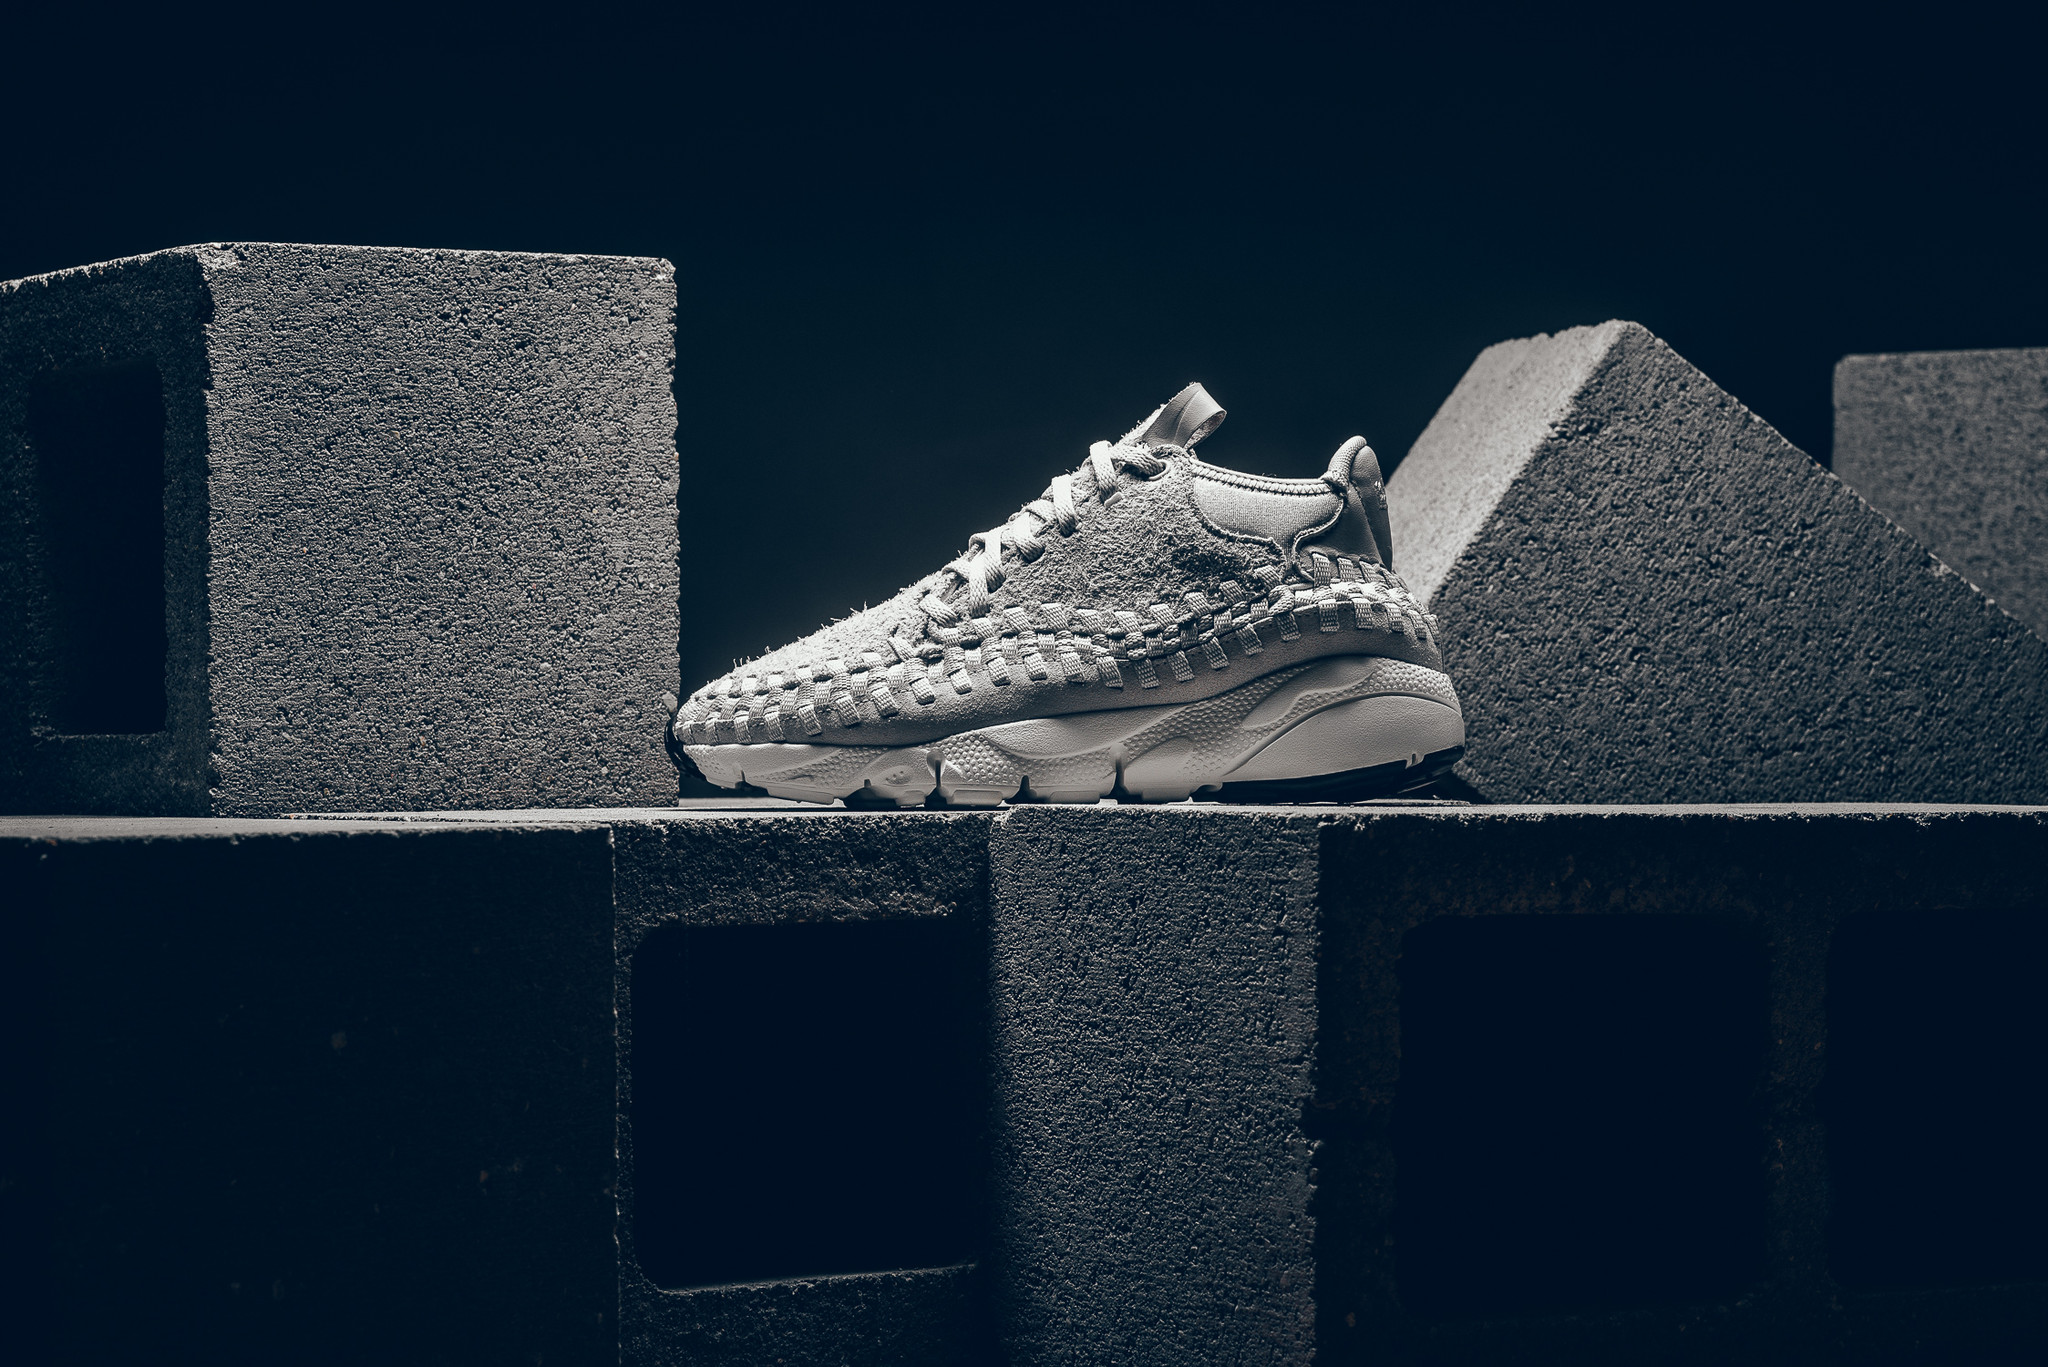 Nike Air Footscape Woven Chukka Releasing in New Colorways This Week ...